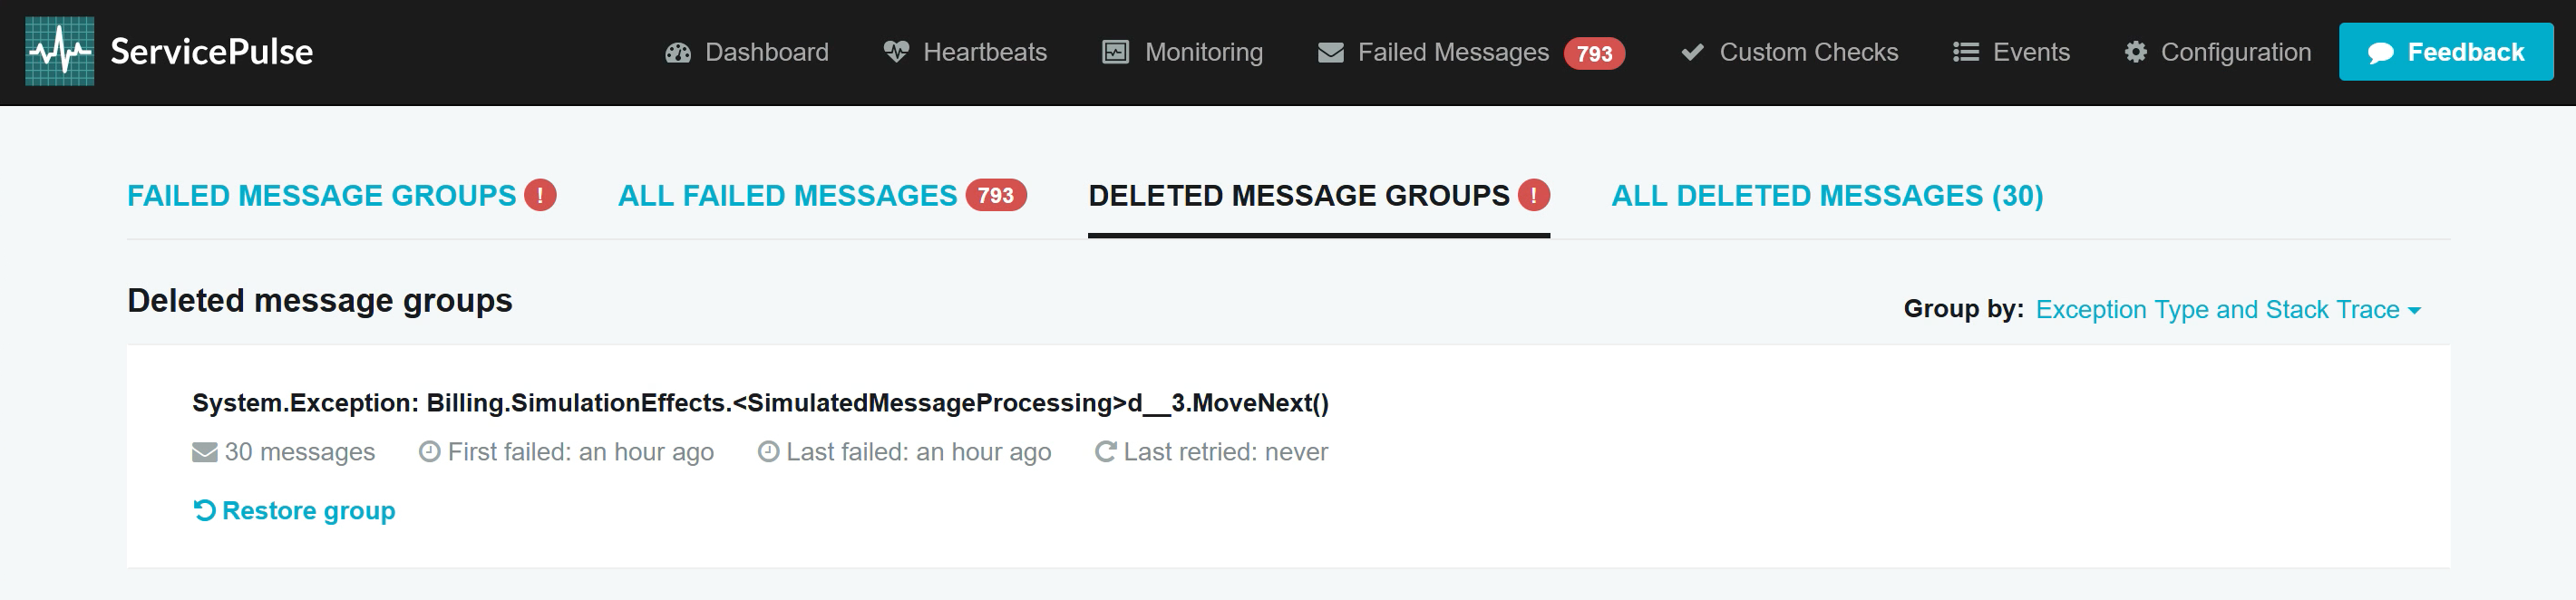 Deleted Message Groups Tab